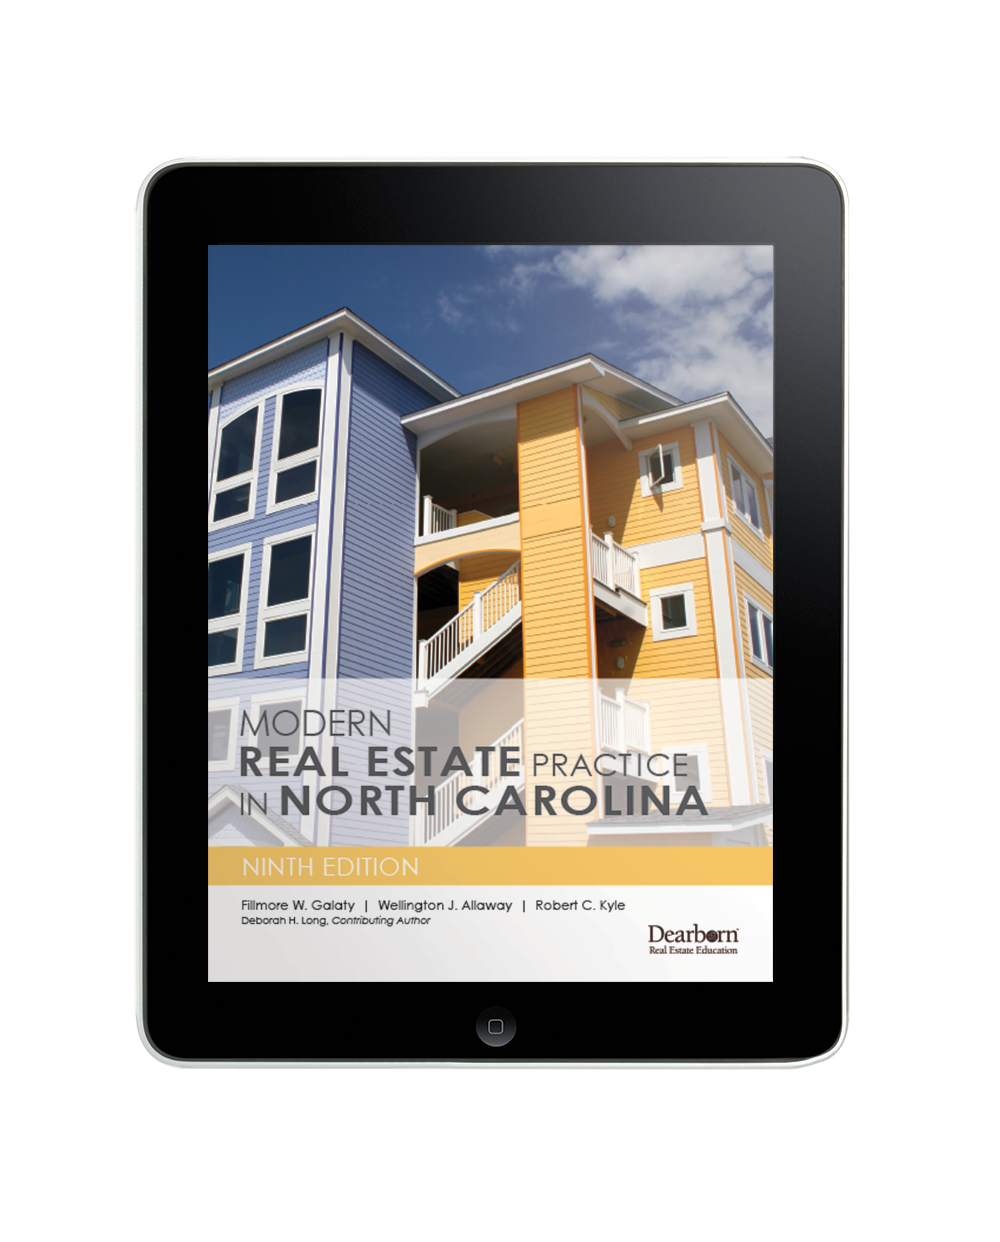 Just Released! Modern Real Estate Practice in North Carolina 9th